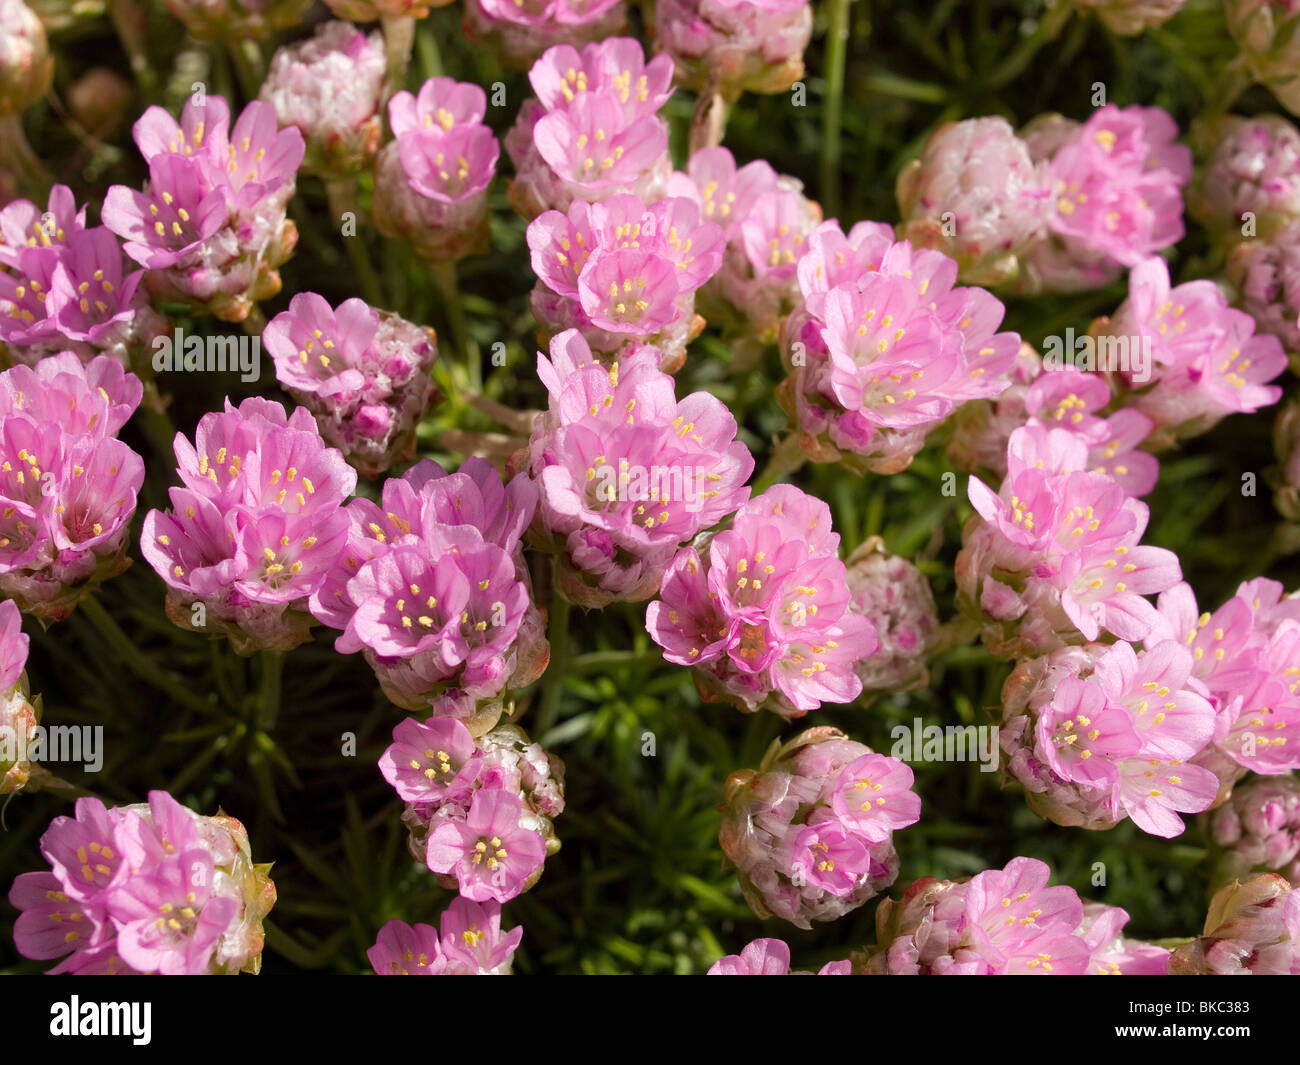 Thrift or Sea Pink flowers Armeria maritima in a garden  Stock Photo